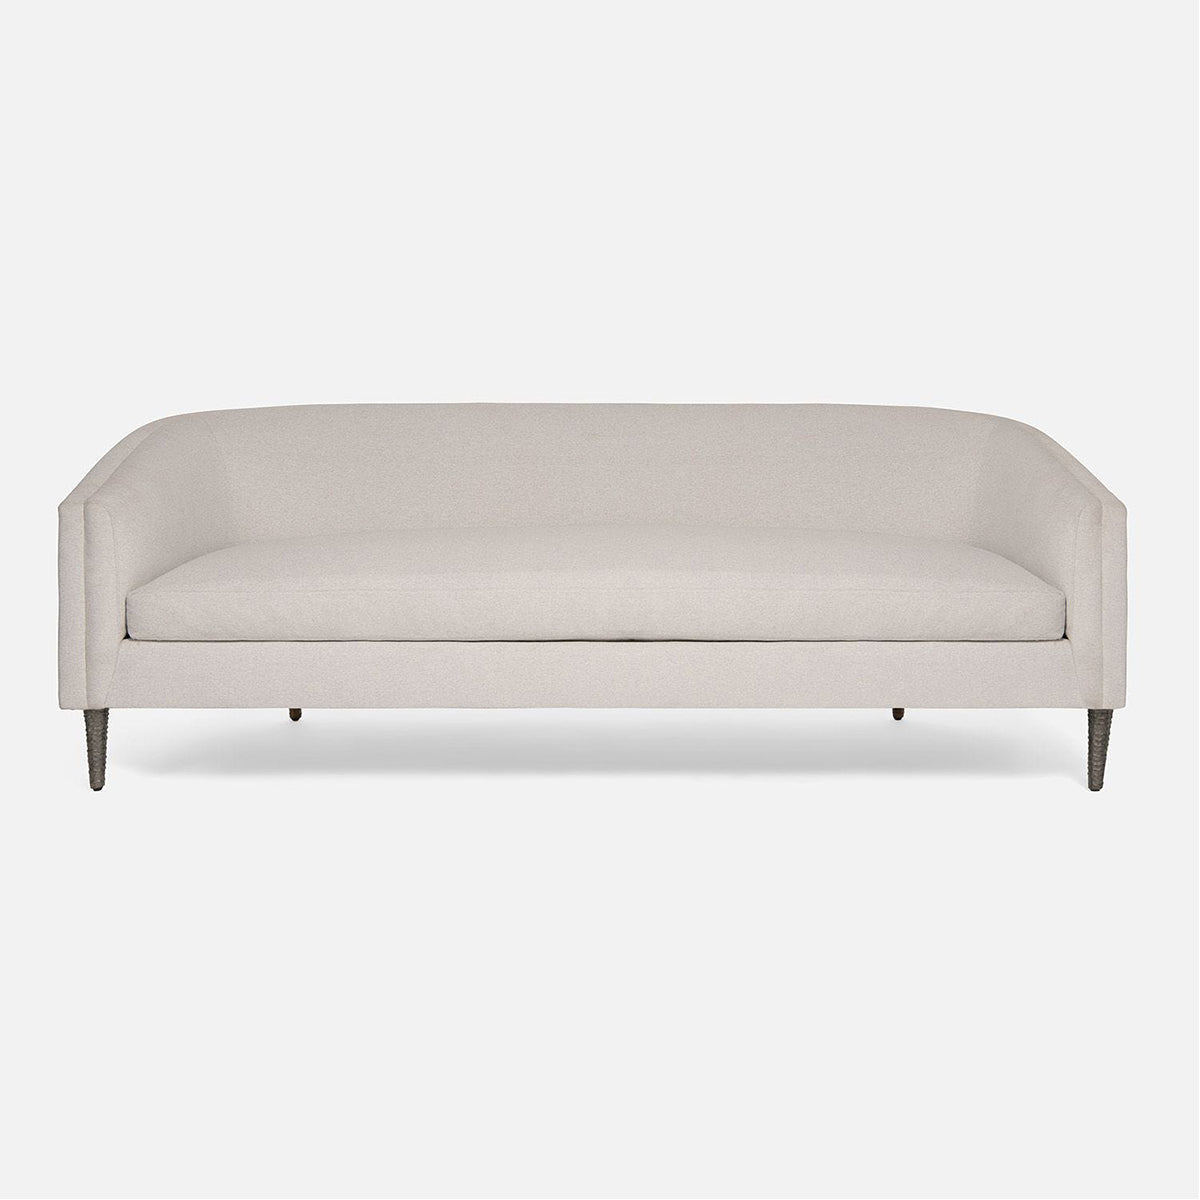 Made Goods Theron Upholstered Curved Back Sofa in Humboldt Cotton Jute